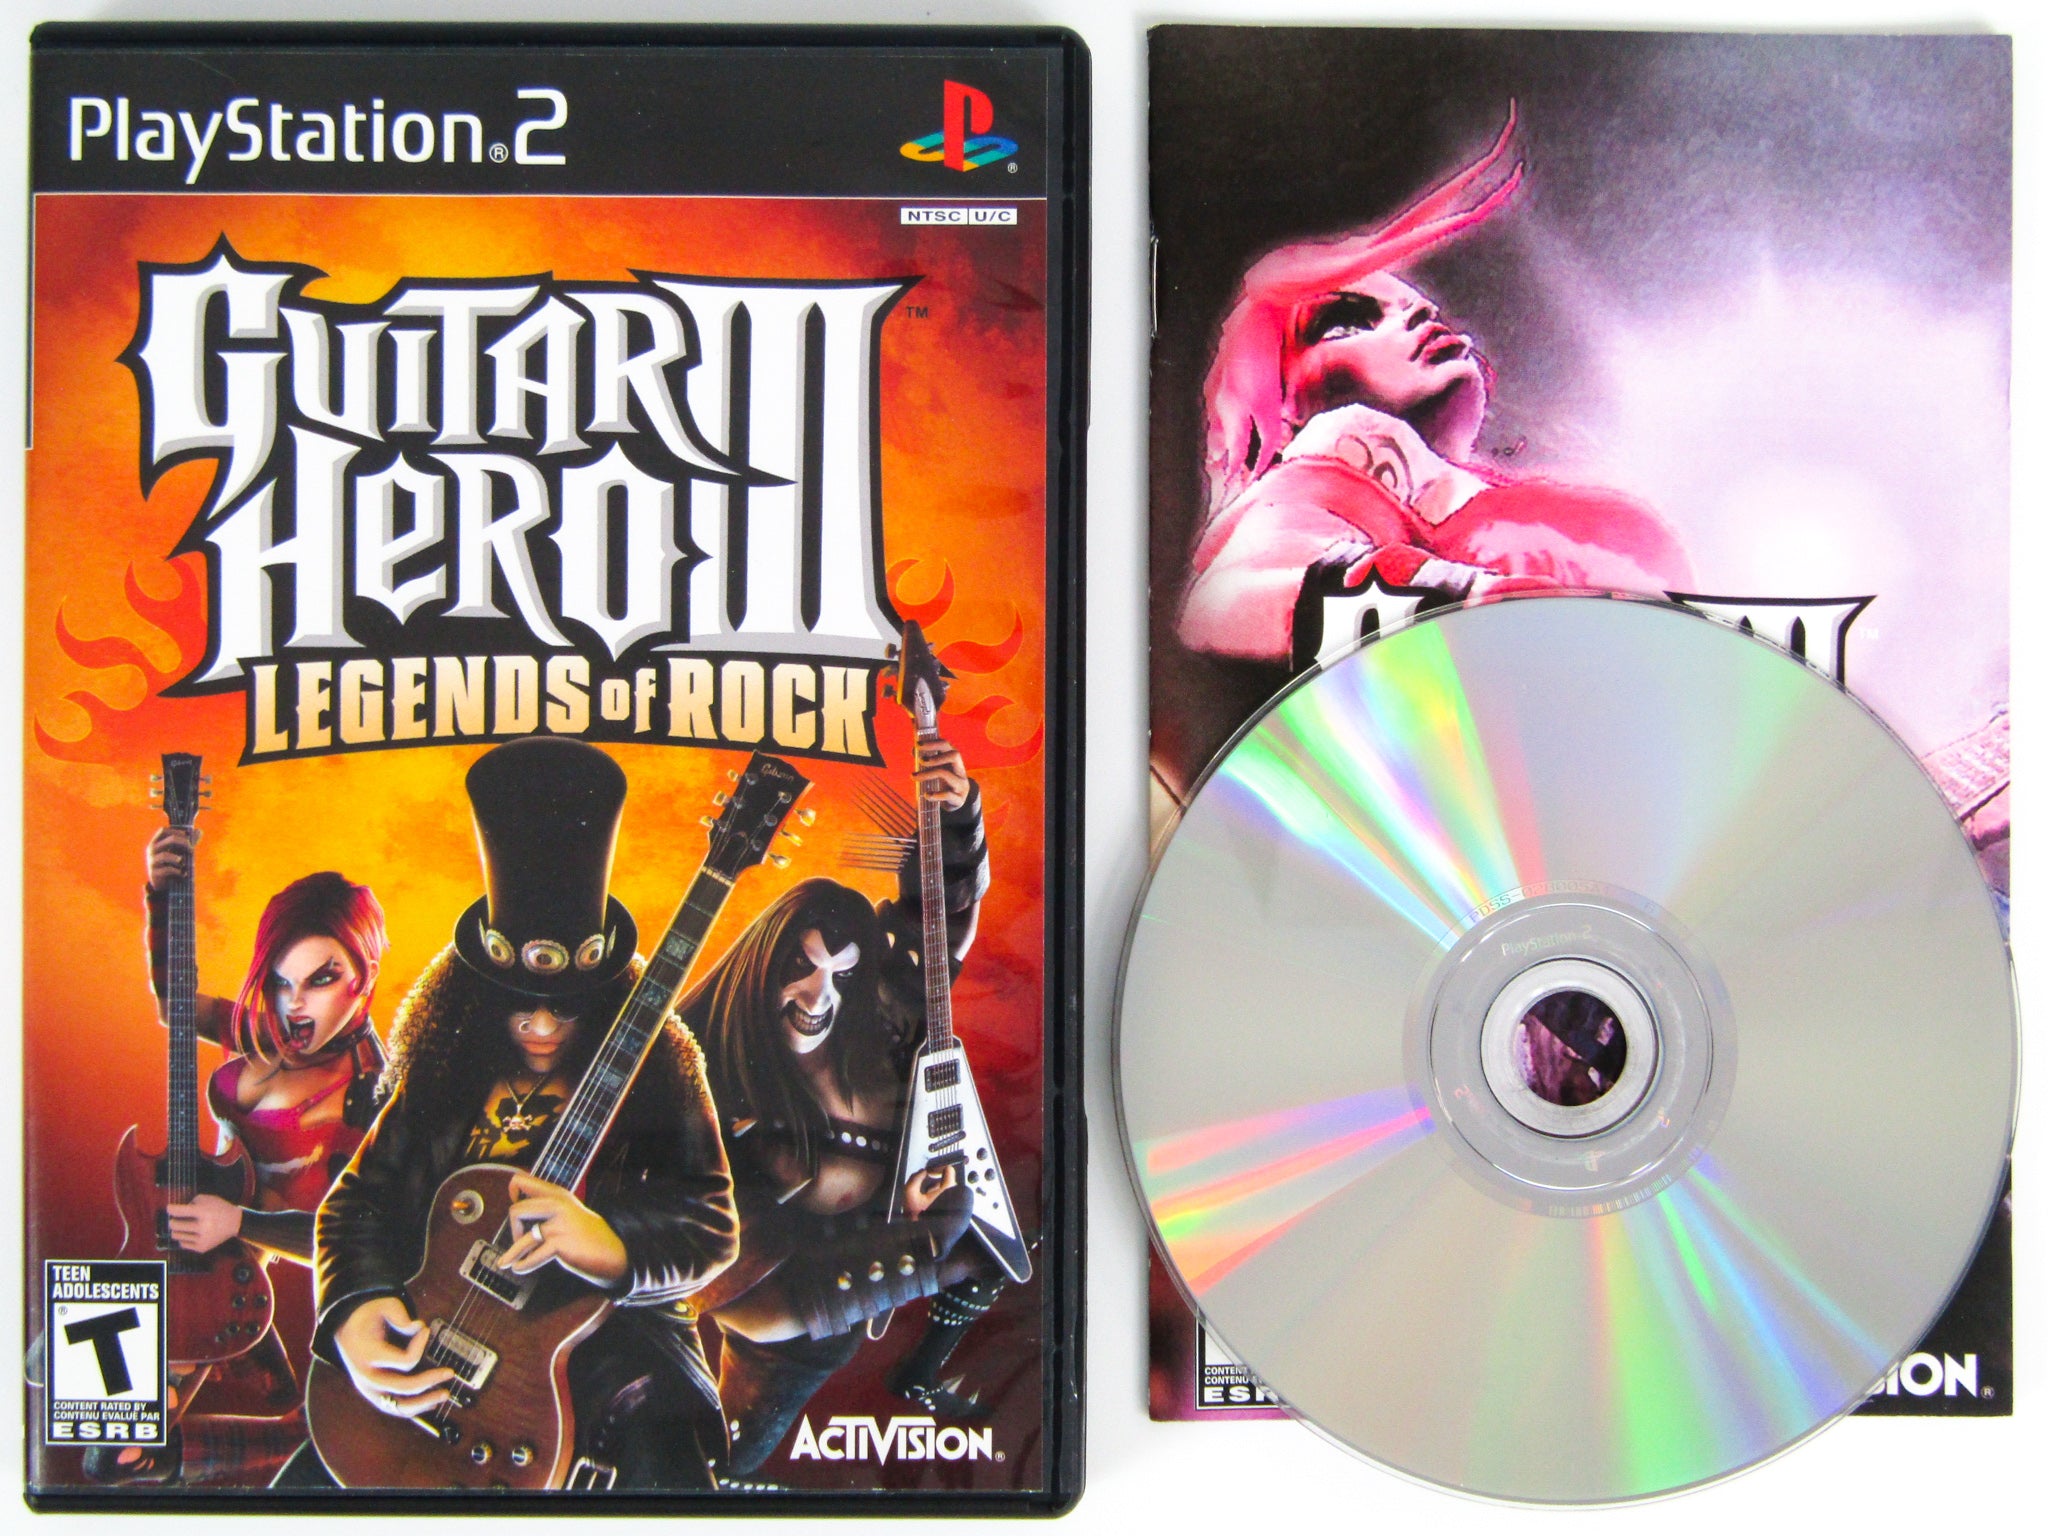  Guitar Hero 1 and 2 (Game Only) - PlayStation 2 : Video Games